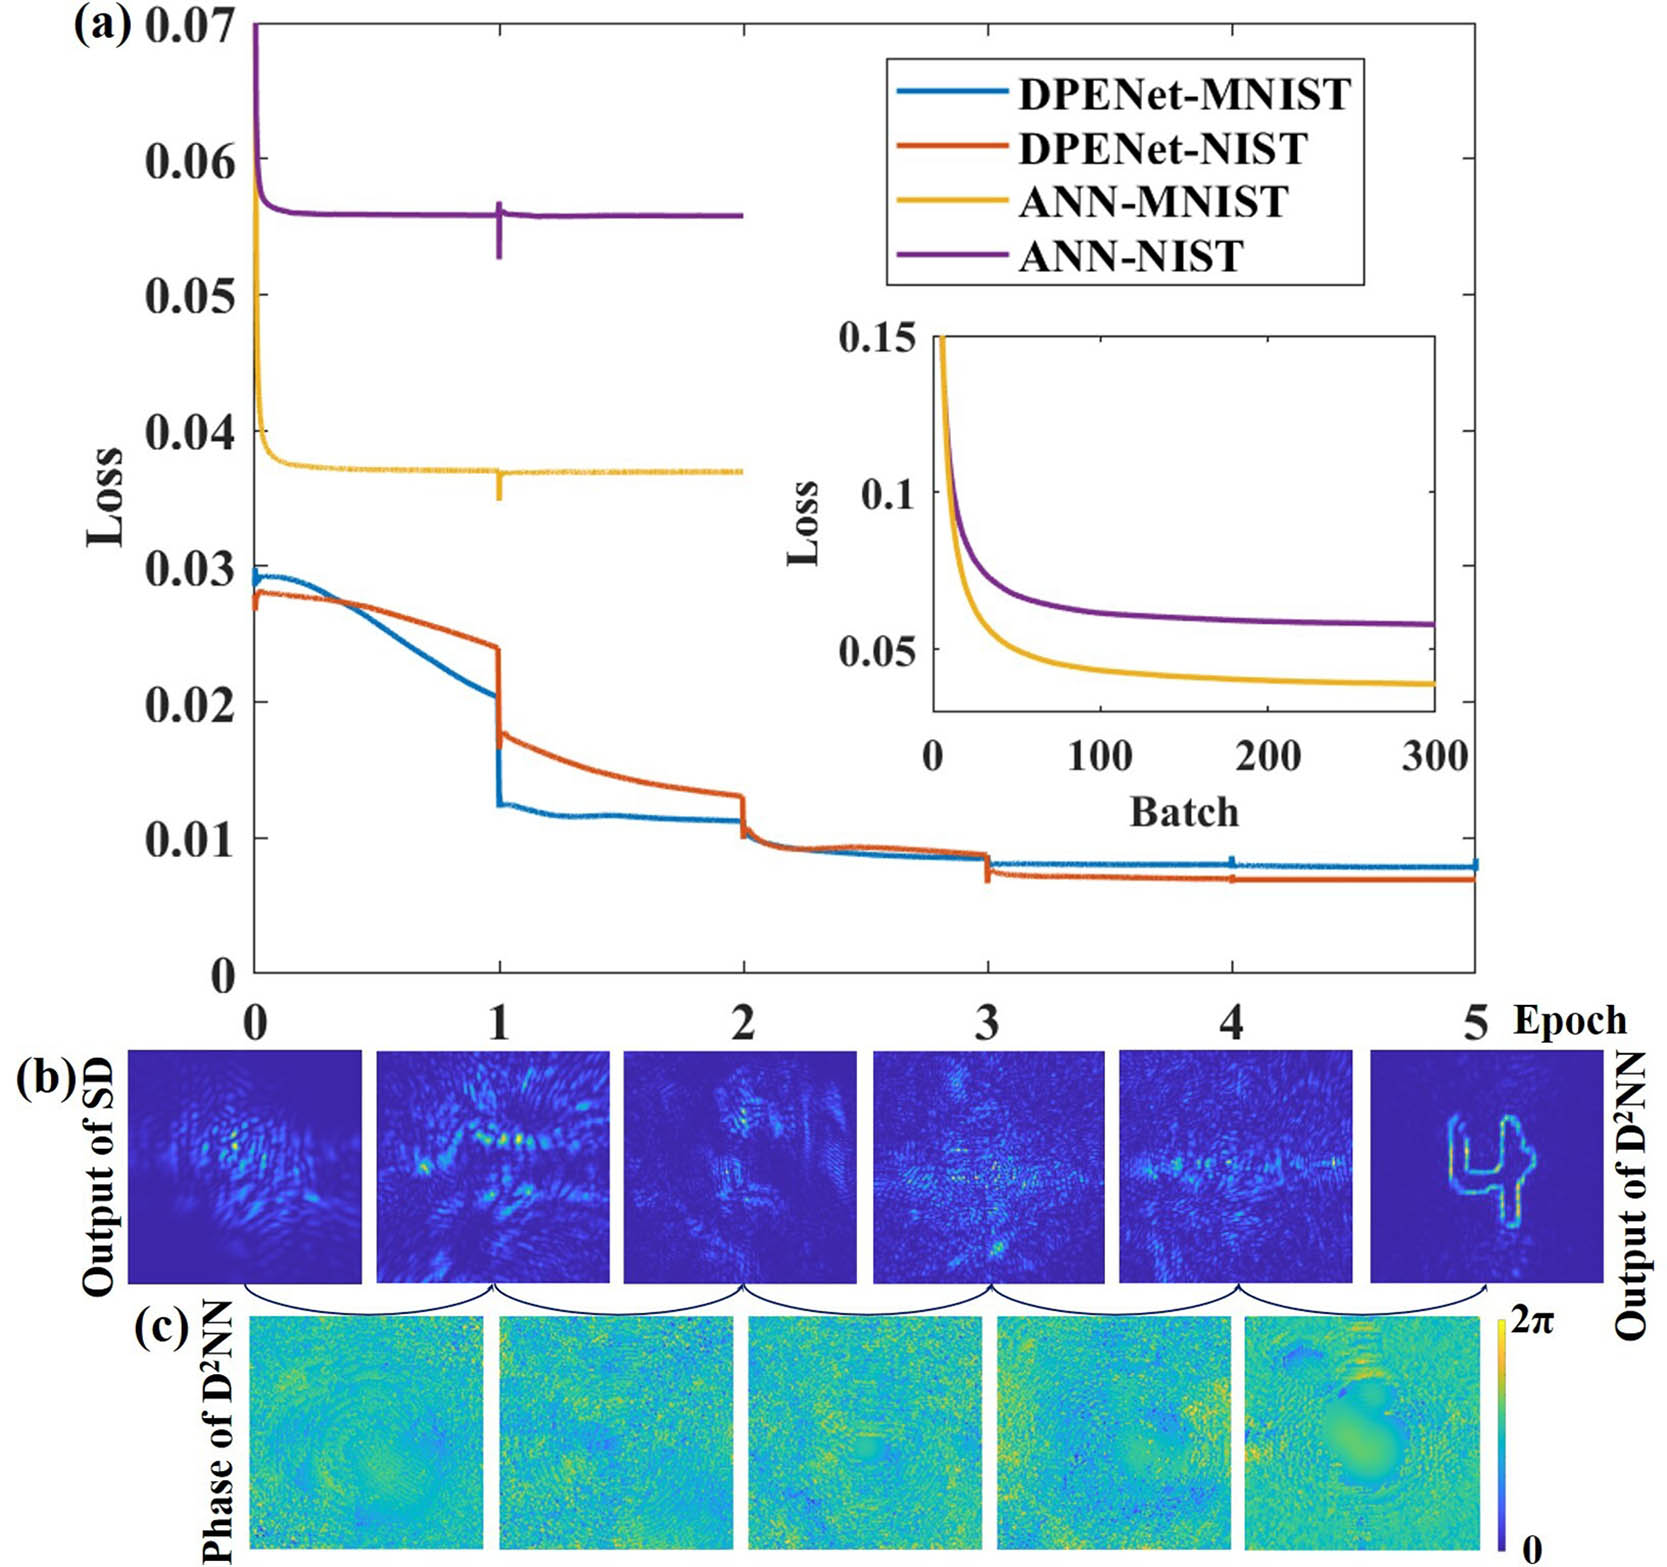 (a) Convergence plots of DPENet and ANN; (b) intensity of each layer of D2NN processor. The complex light field is directly phase-only modulated by D2NN, but only the intensity distribution of each layer is shown. (c) Phase parameters of each layer of D2NN obtained by training.